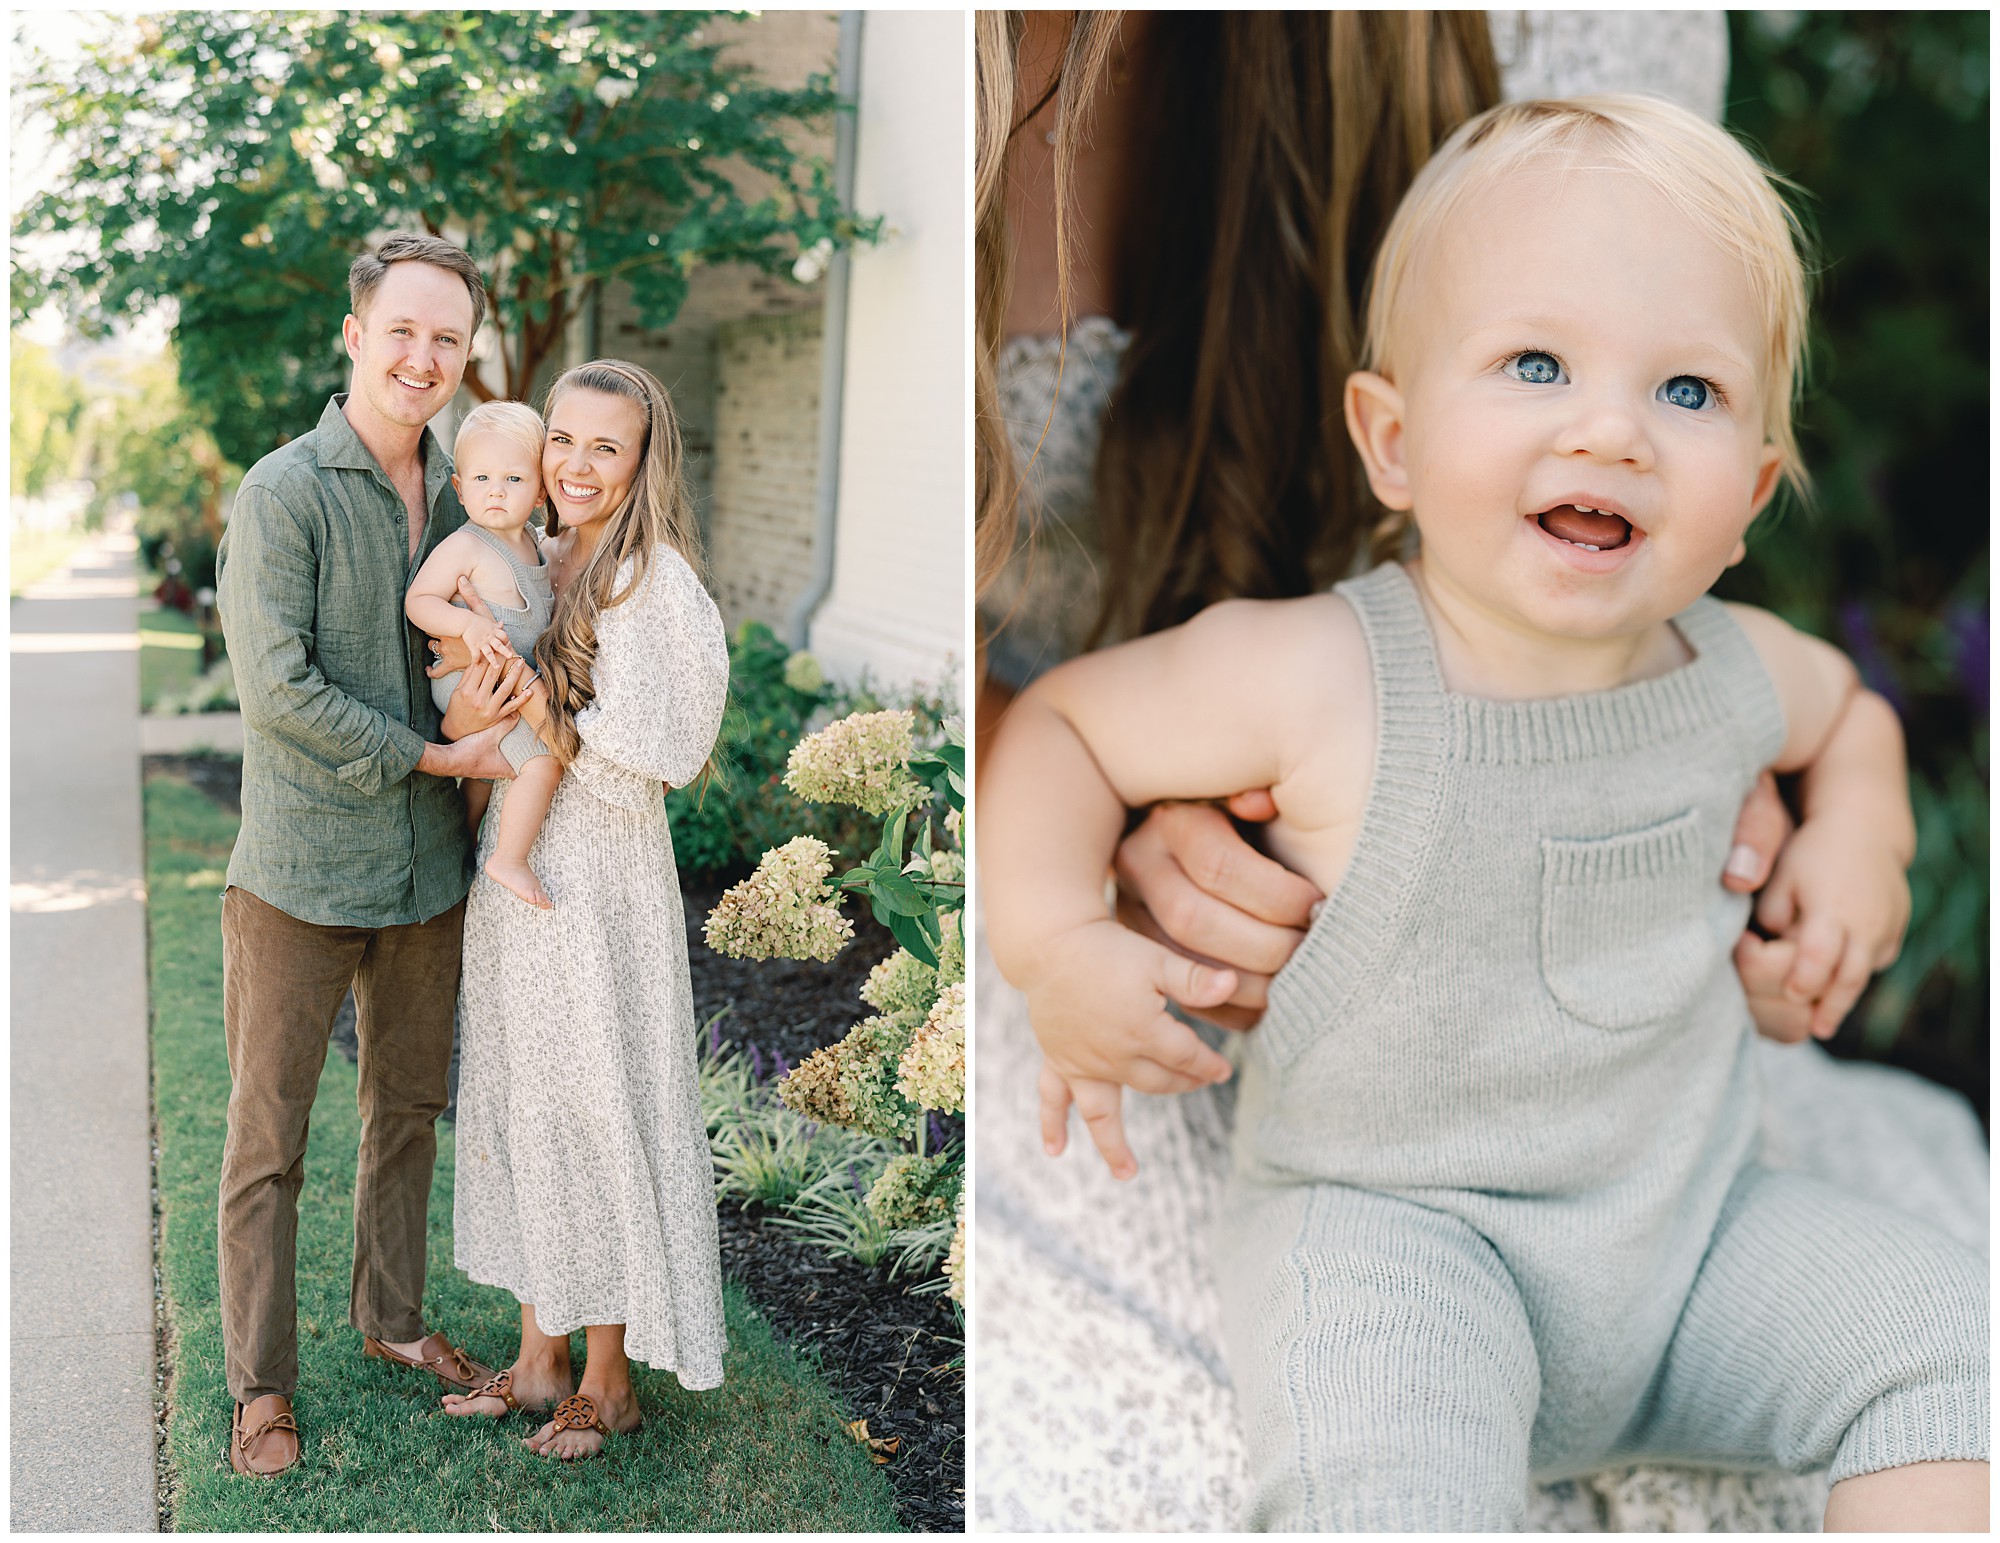 One photo of parents holding their one year old son and smiling for a portrait and a close up image of the young boy smiling up at the camera with blonde hair and blue eyes for an Alpharetta family photography session.